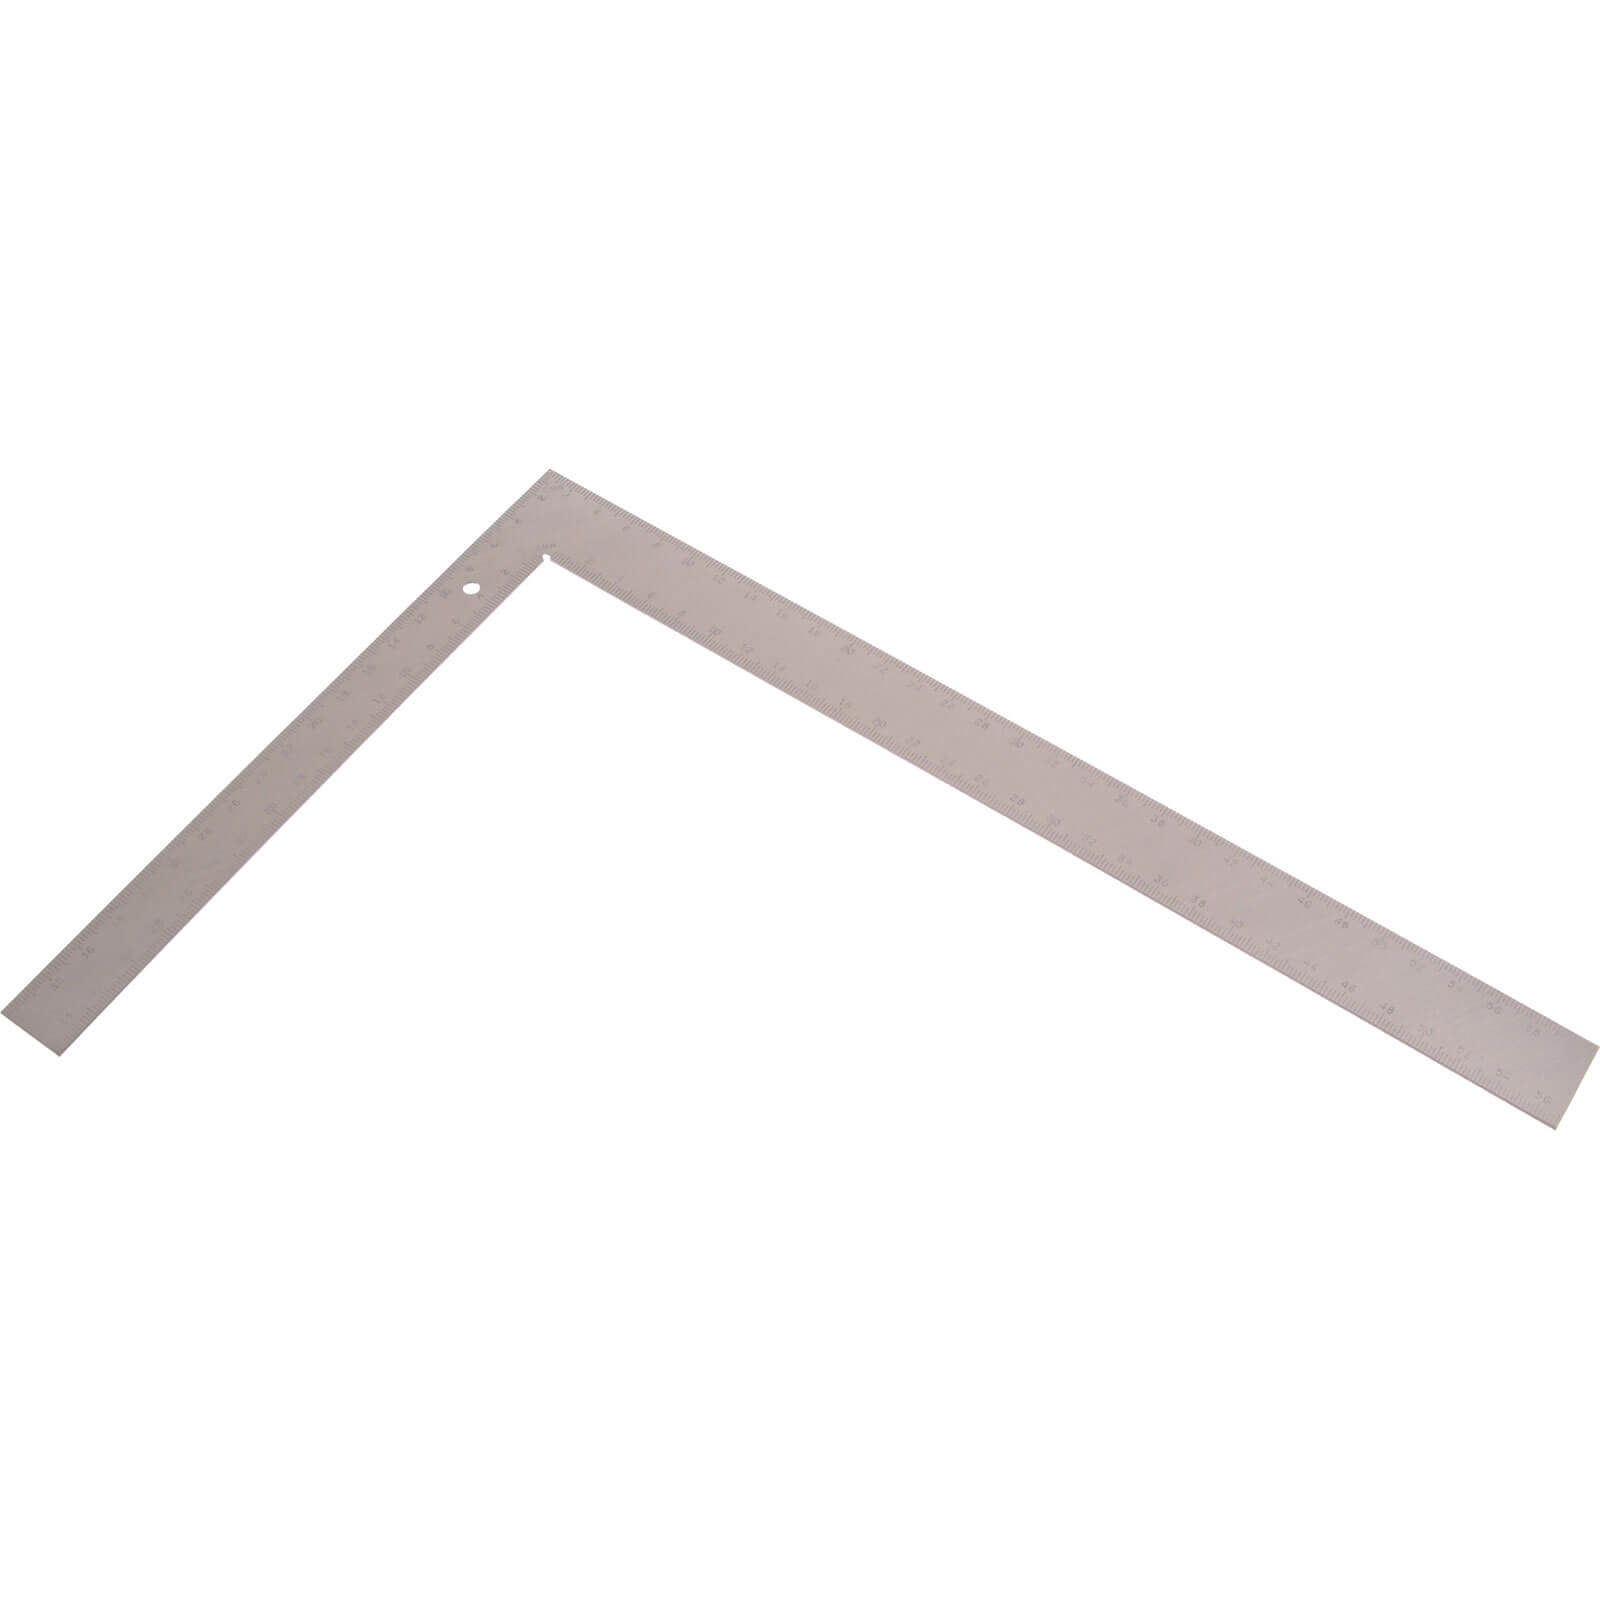 Fisher F1110Imr Steel Roofing Square 16X24"